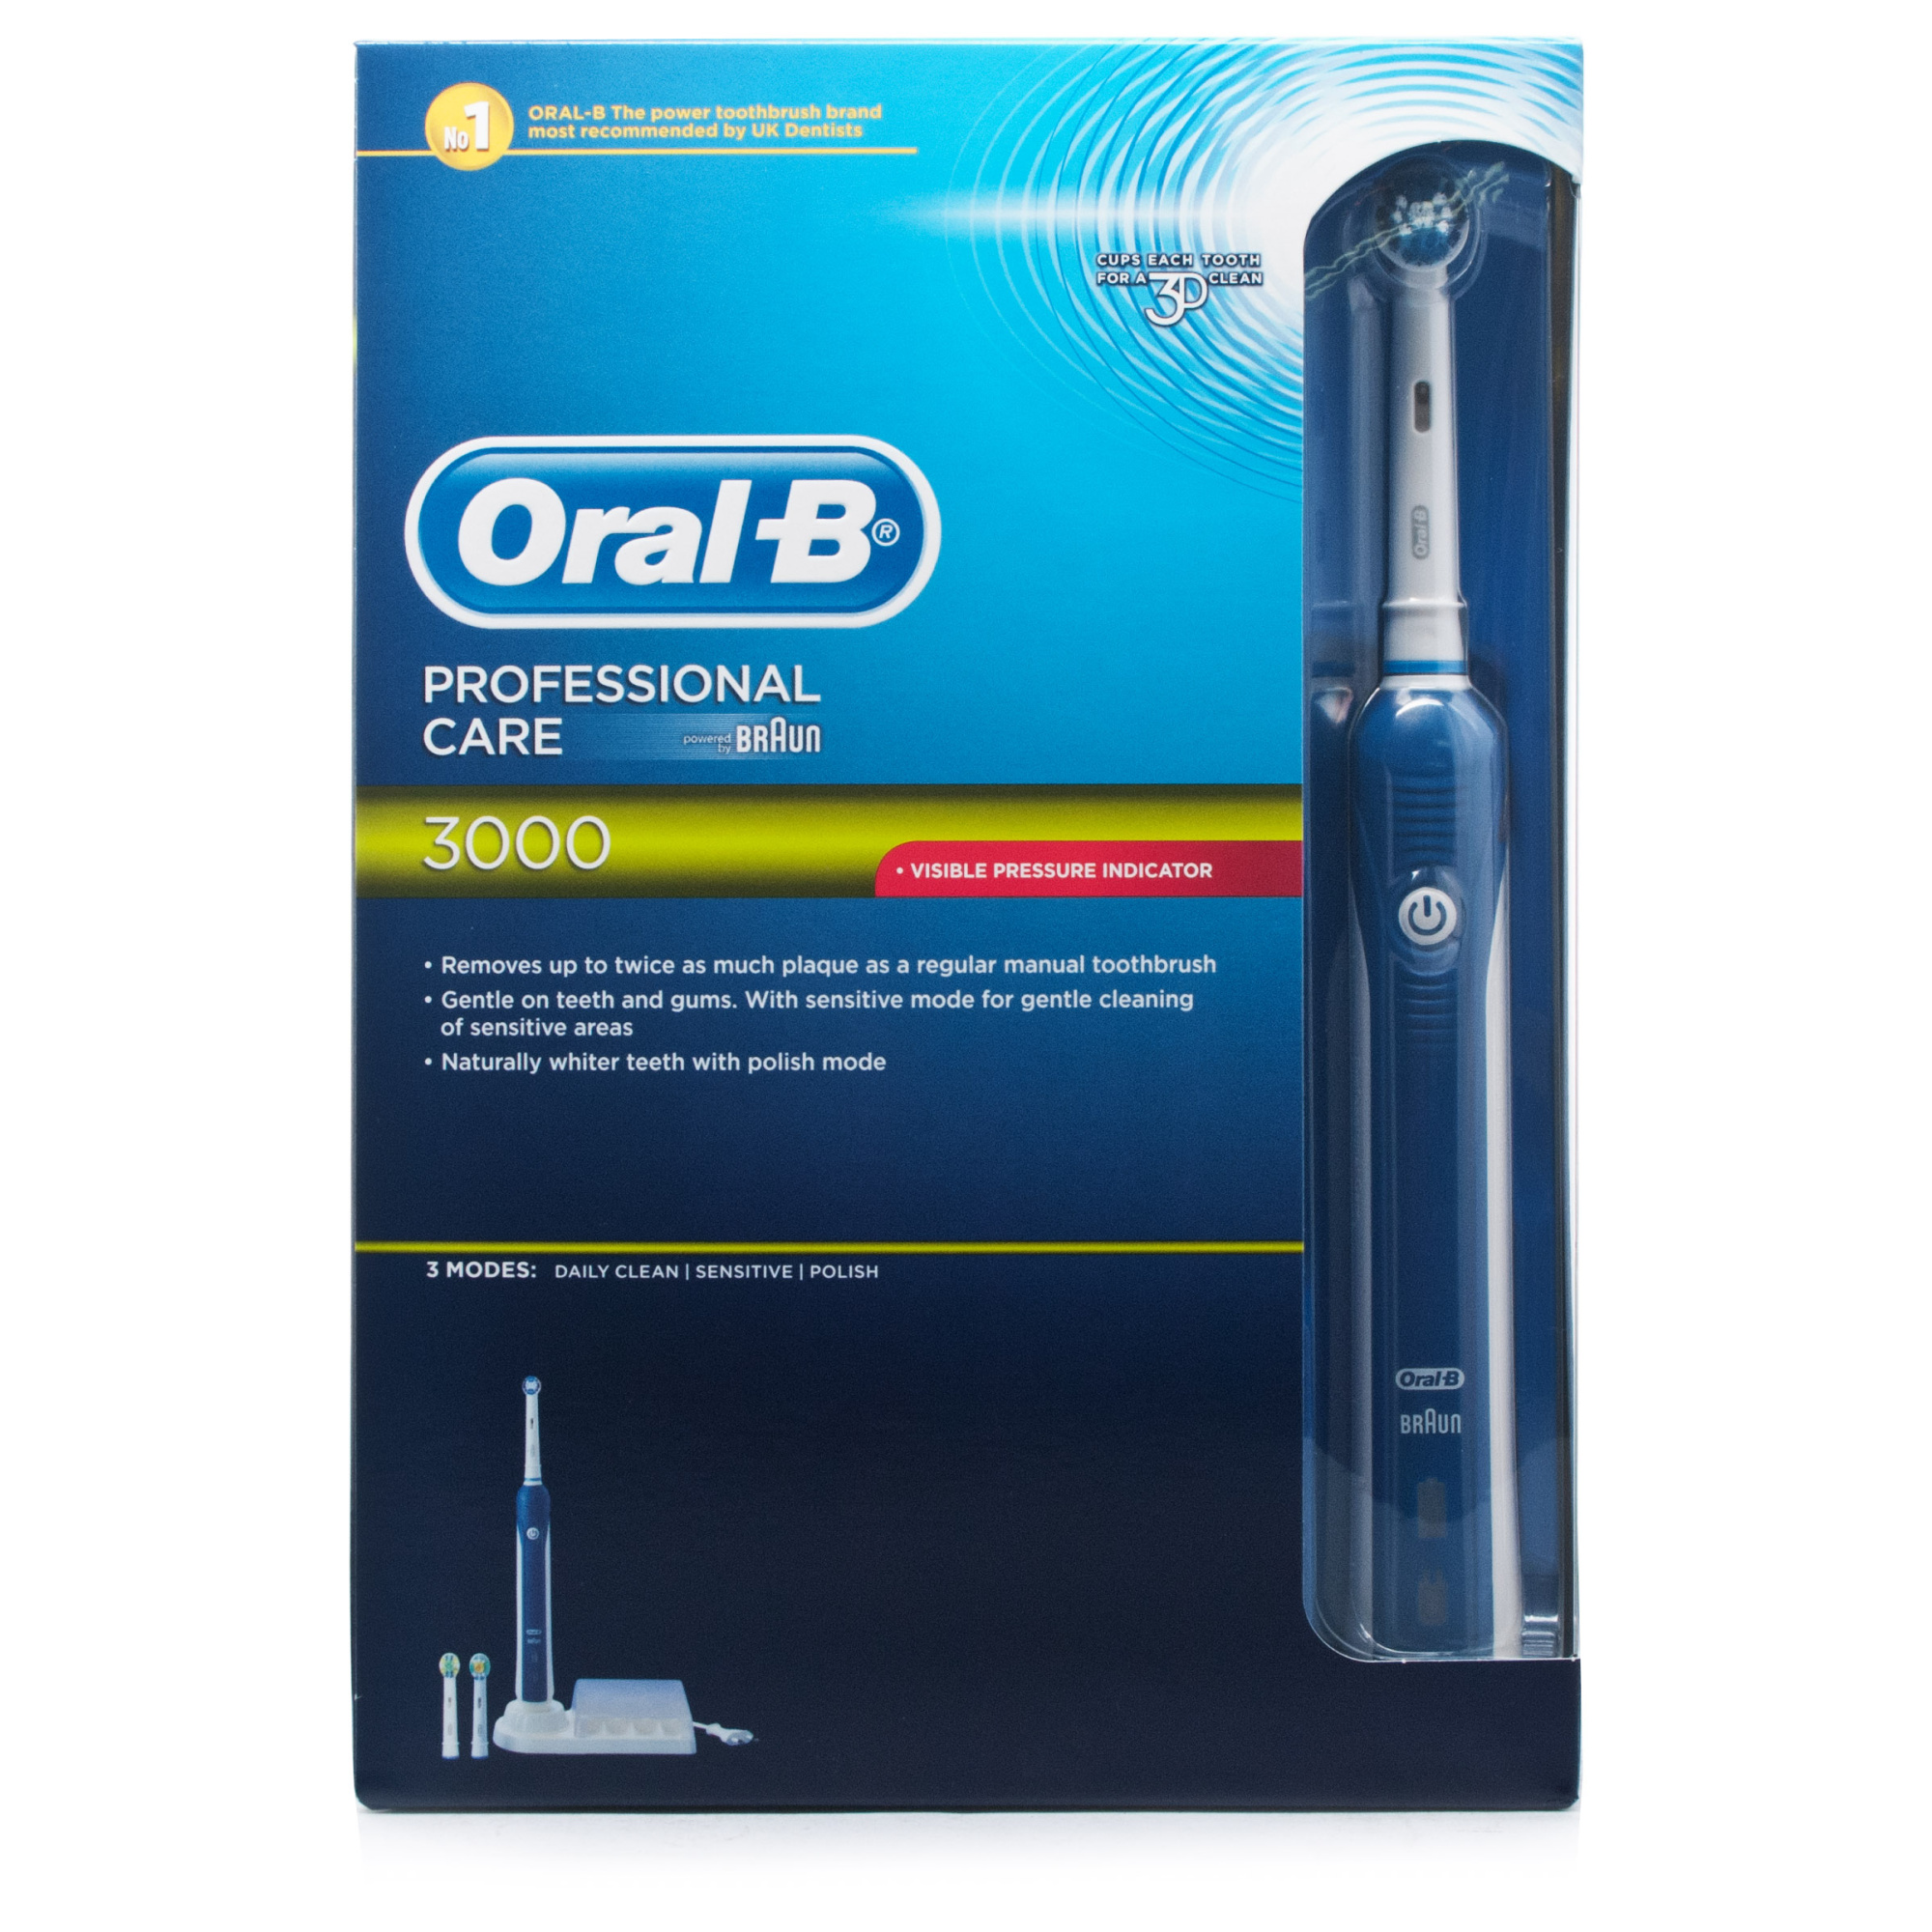 oral-b-professional-care-3000-electric-toothbrush-chemist-direct